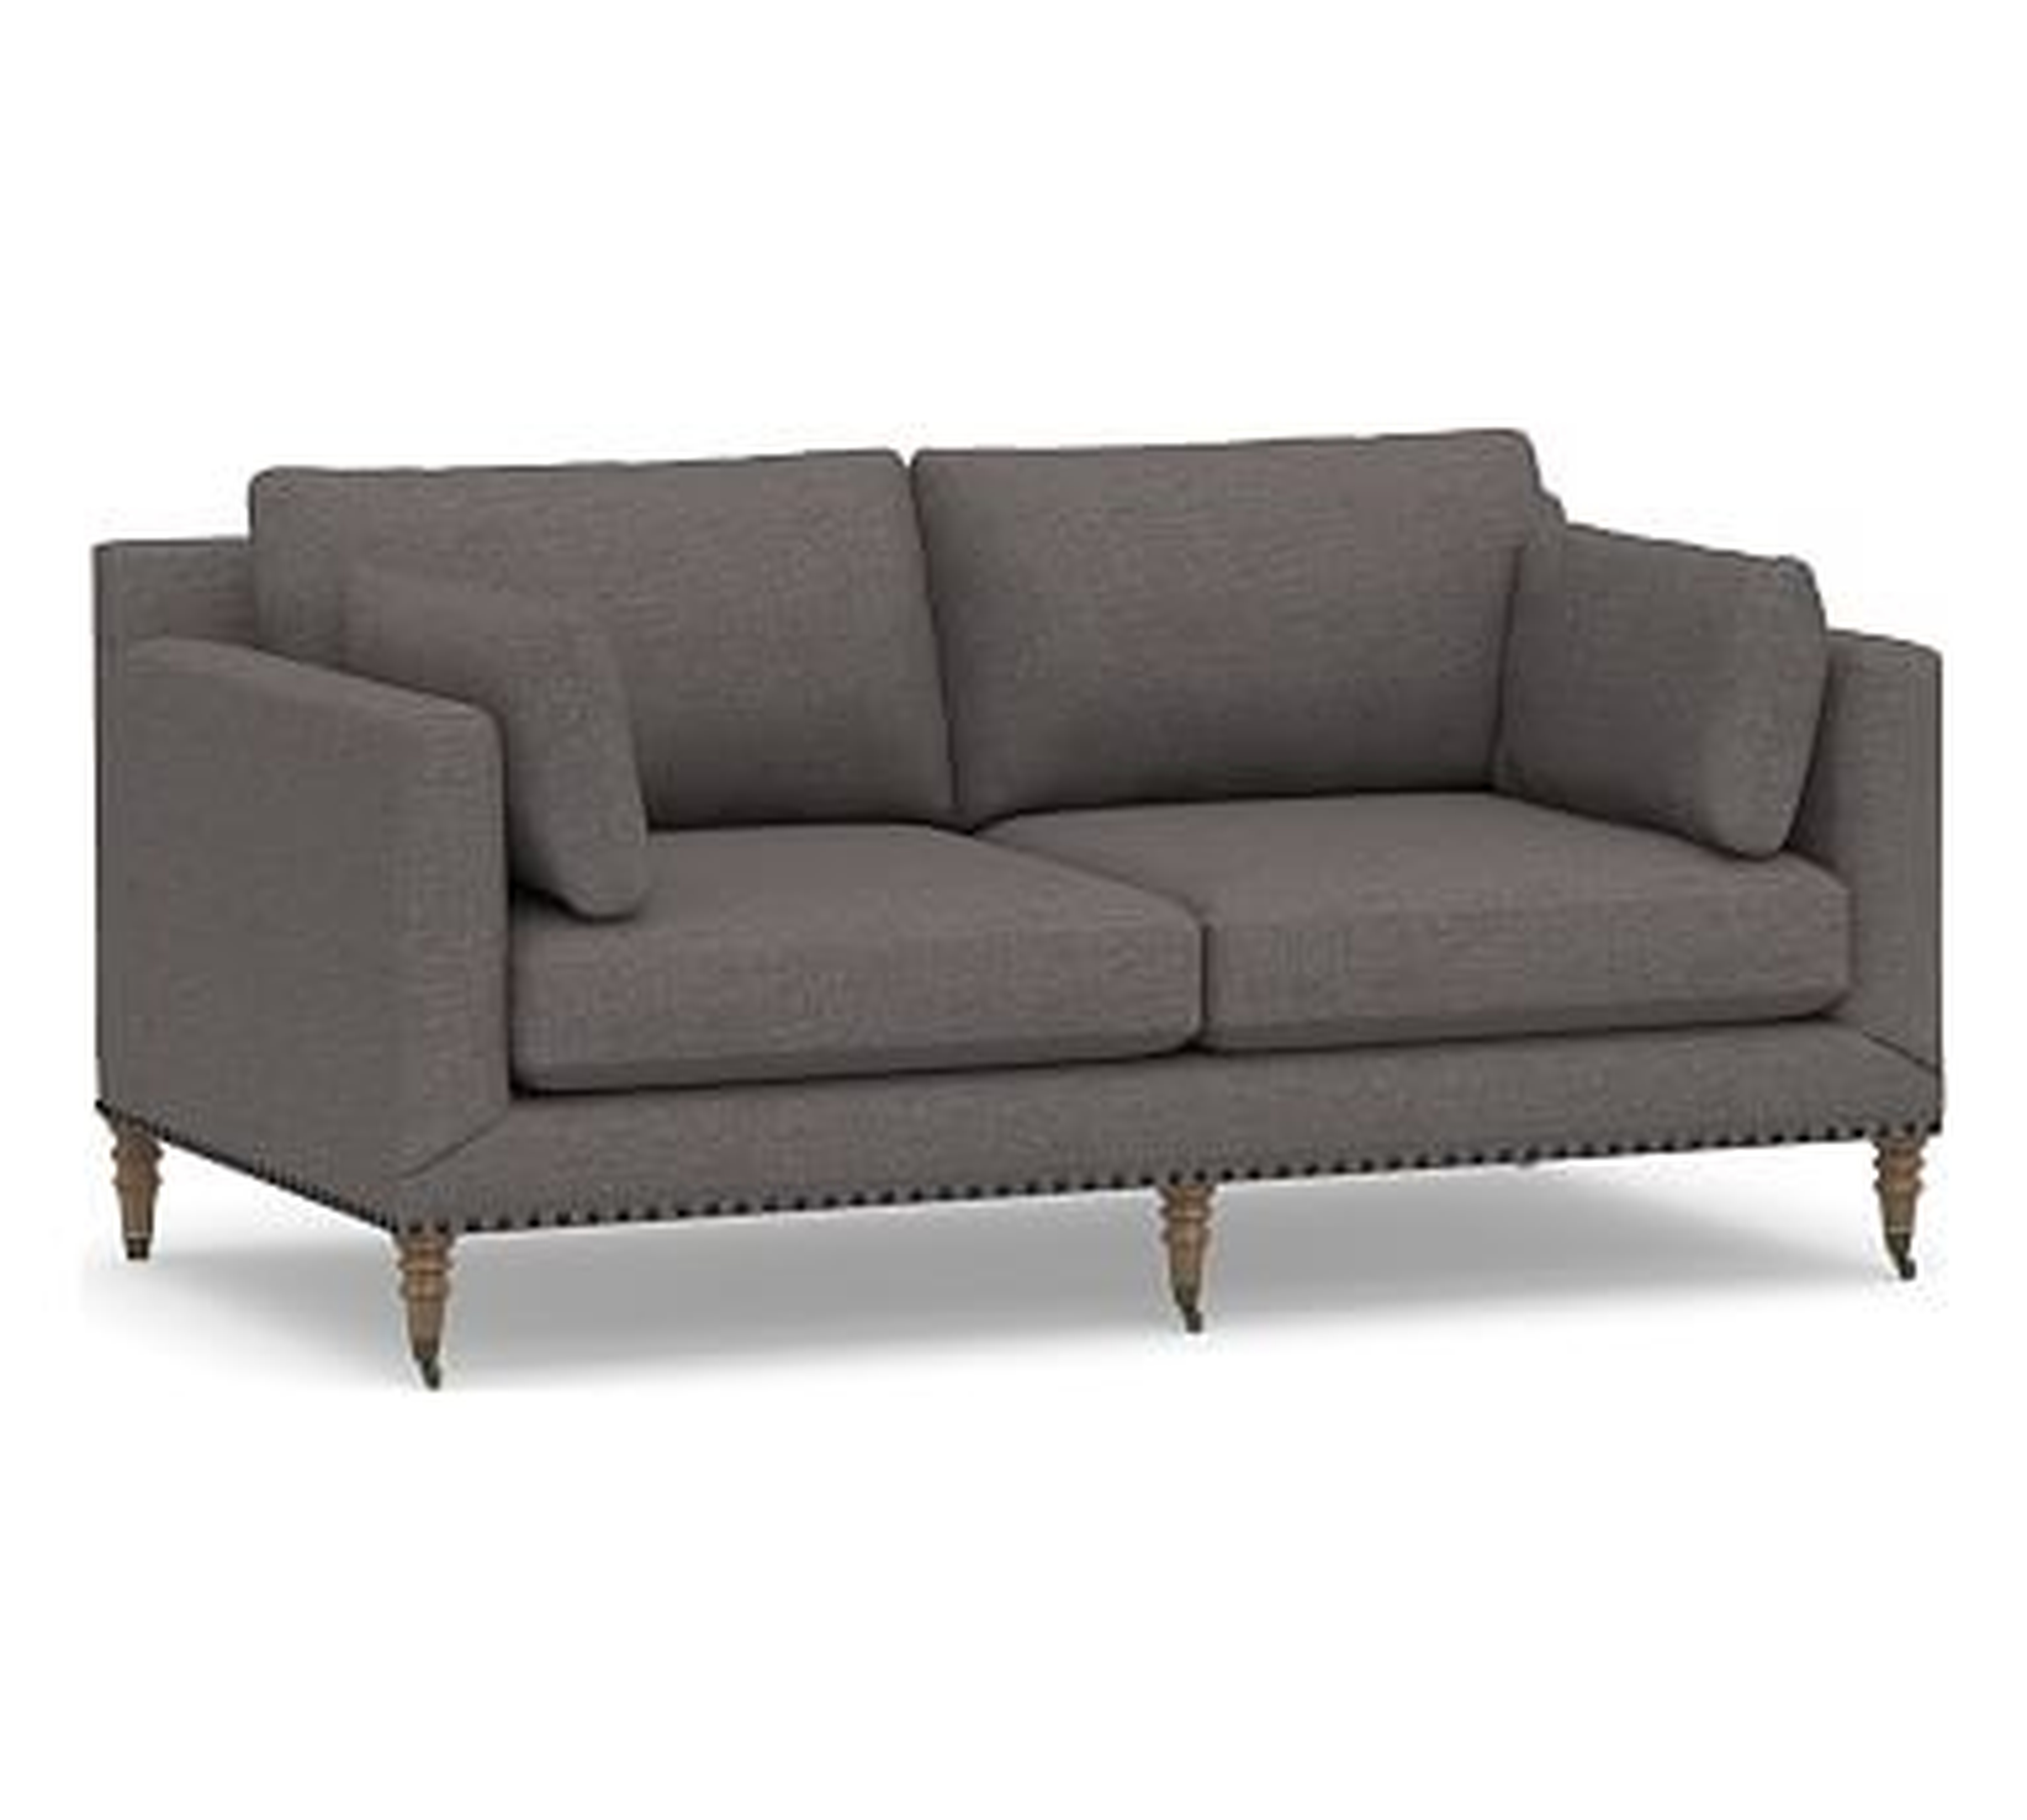 Tallulah Upholstered Loveseat 72", Down Blend Wrapped Cushions, Brushed Crossweave Charcoal - Pottery Barn